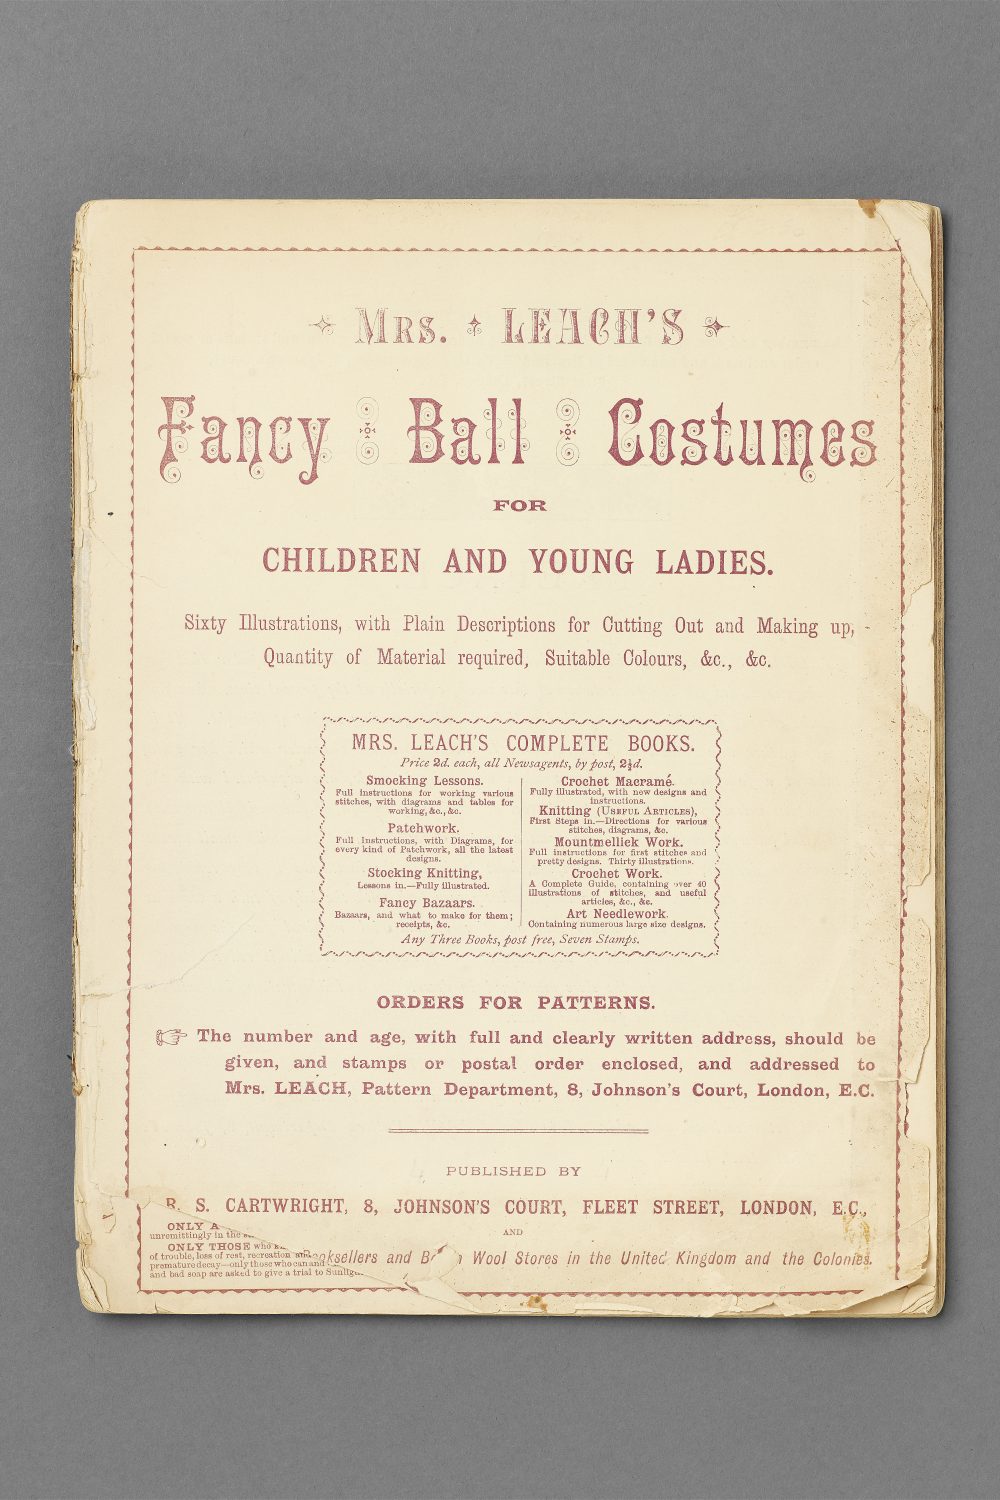 Fancy Ball Costumes Catalogue